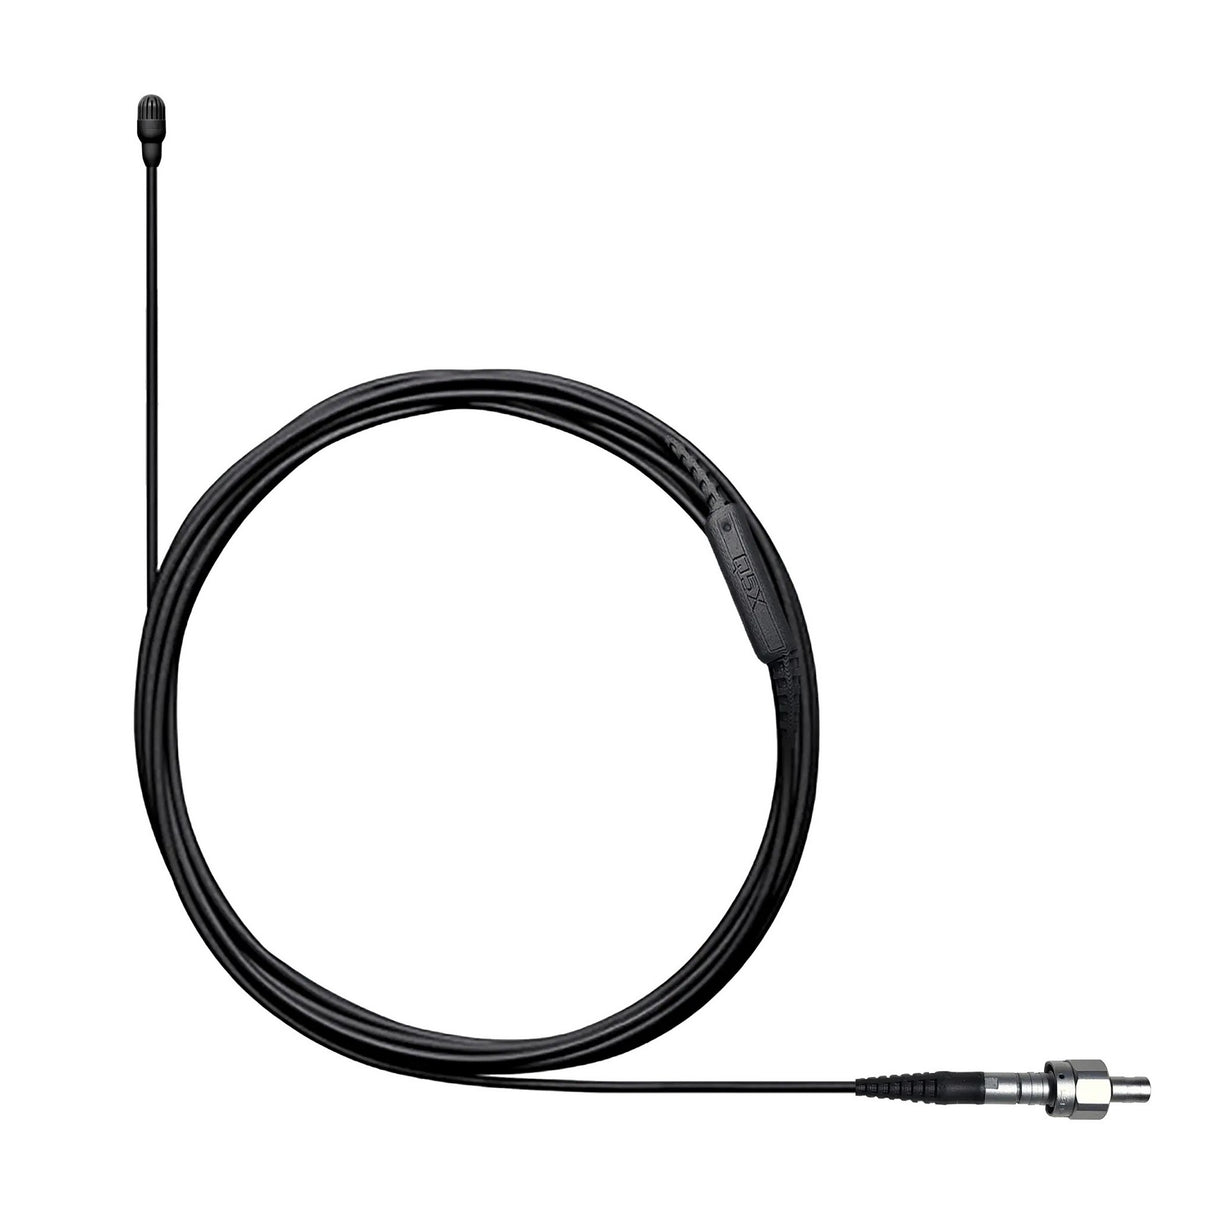 Shure TL46B/O-LEMO6-A TwinPlex Omnidirectional Subminiature Microphone, Black with LEMO Connector, No Accessories